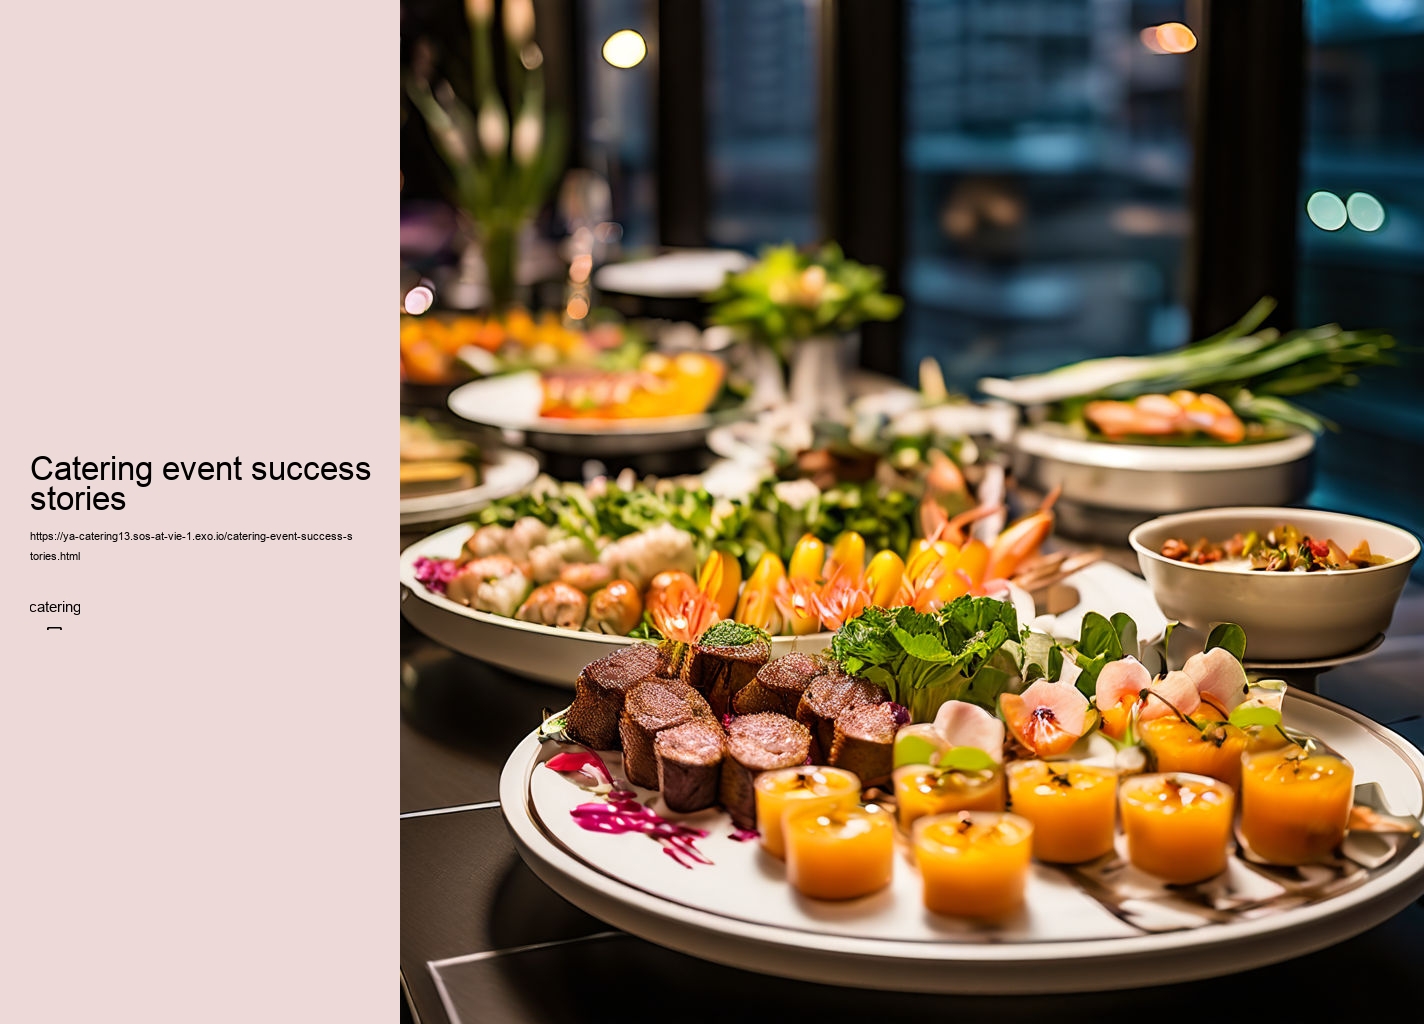 Catering event success stories